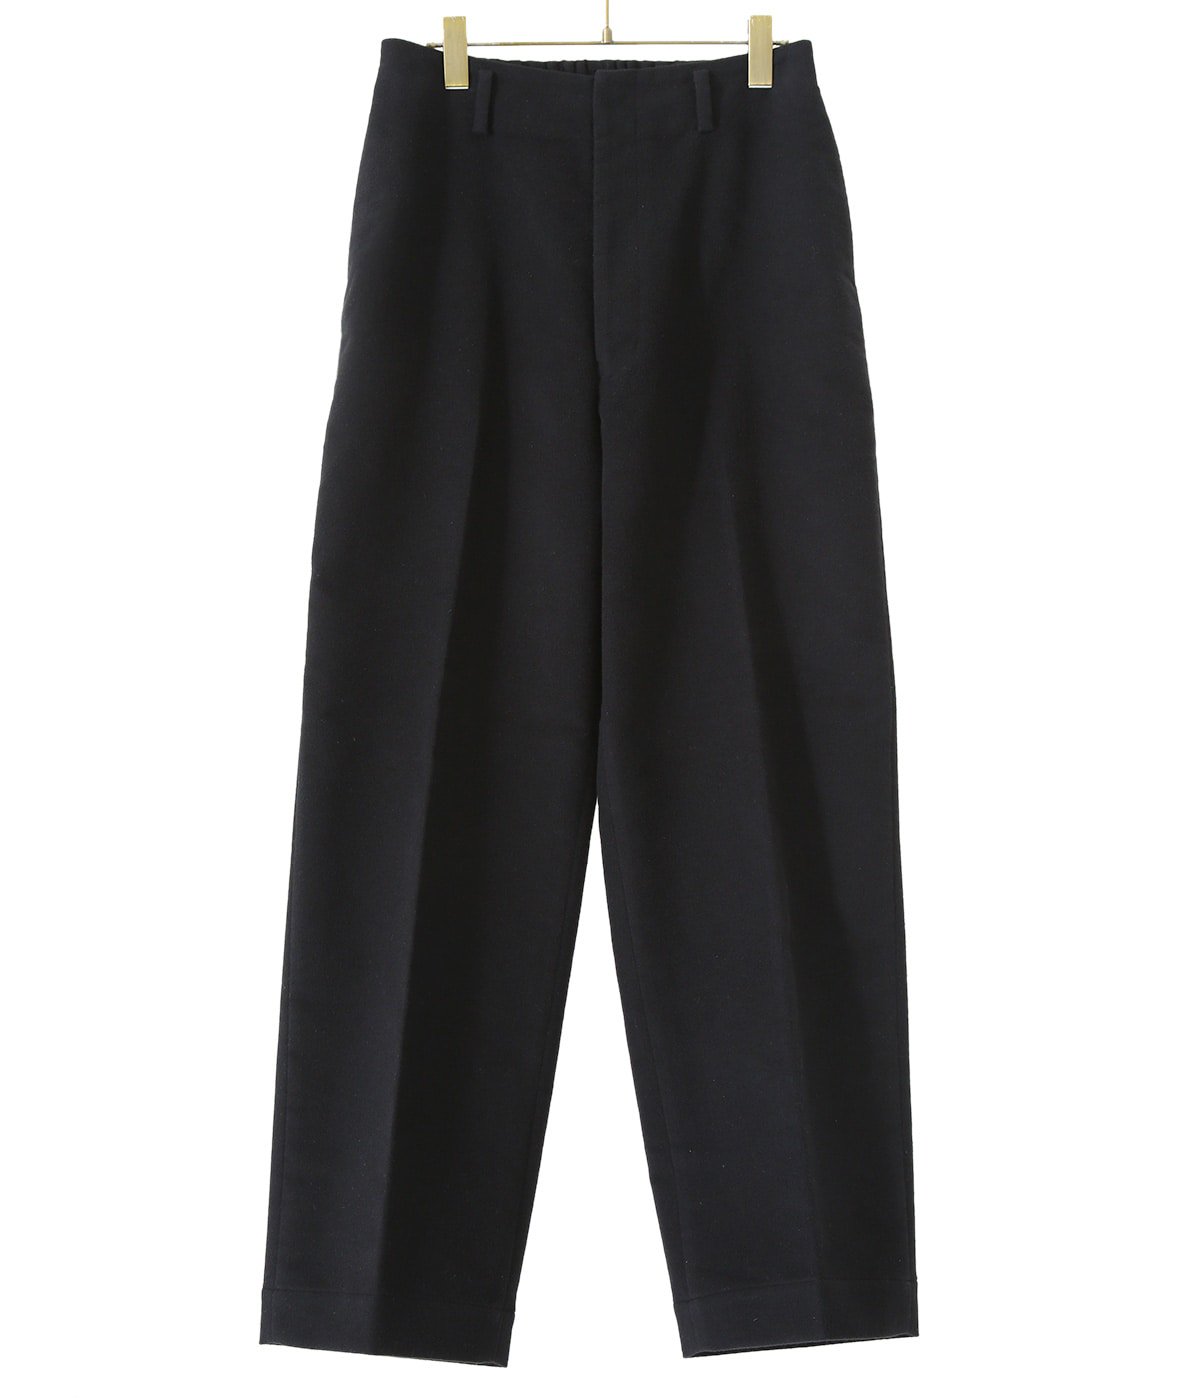  ZYXTIM Women's Relaxed Fit Straight Leg Pants Wrinkle